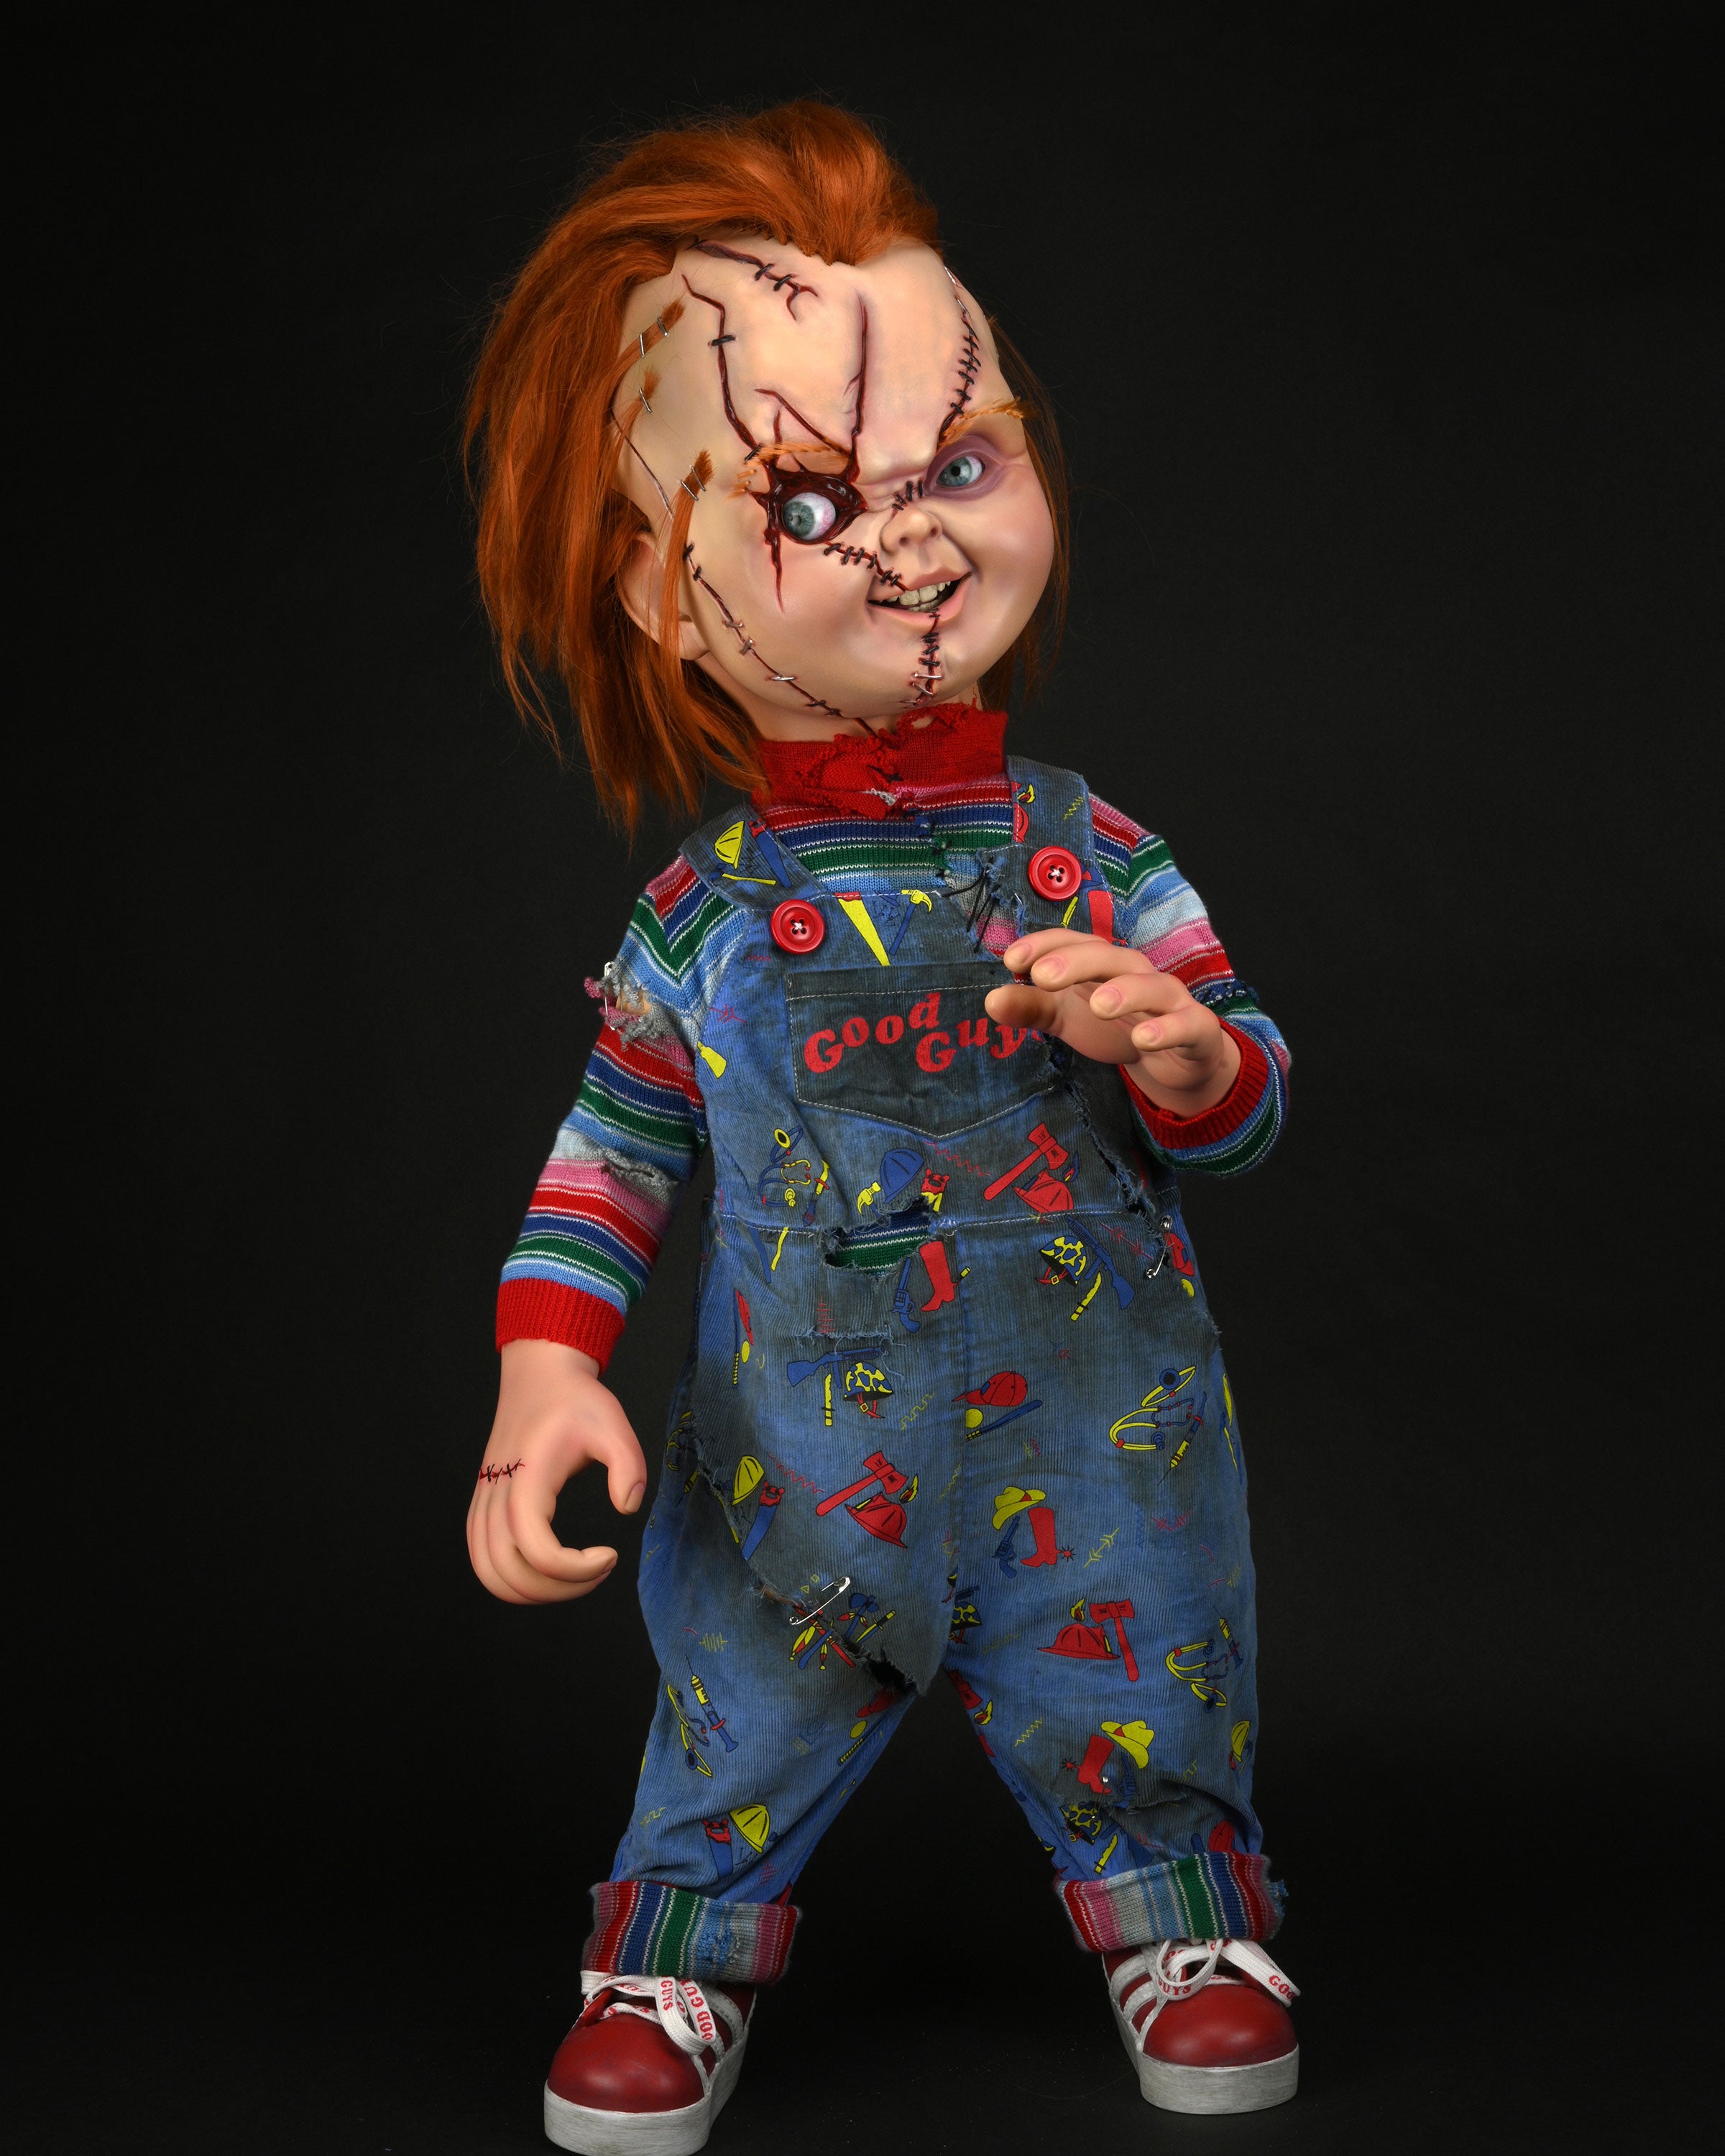 NECA Chucky Prop Replica with Wounds